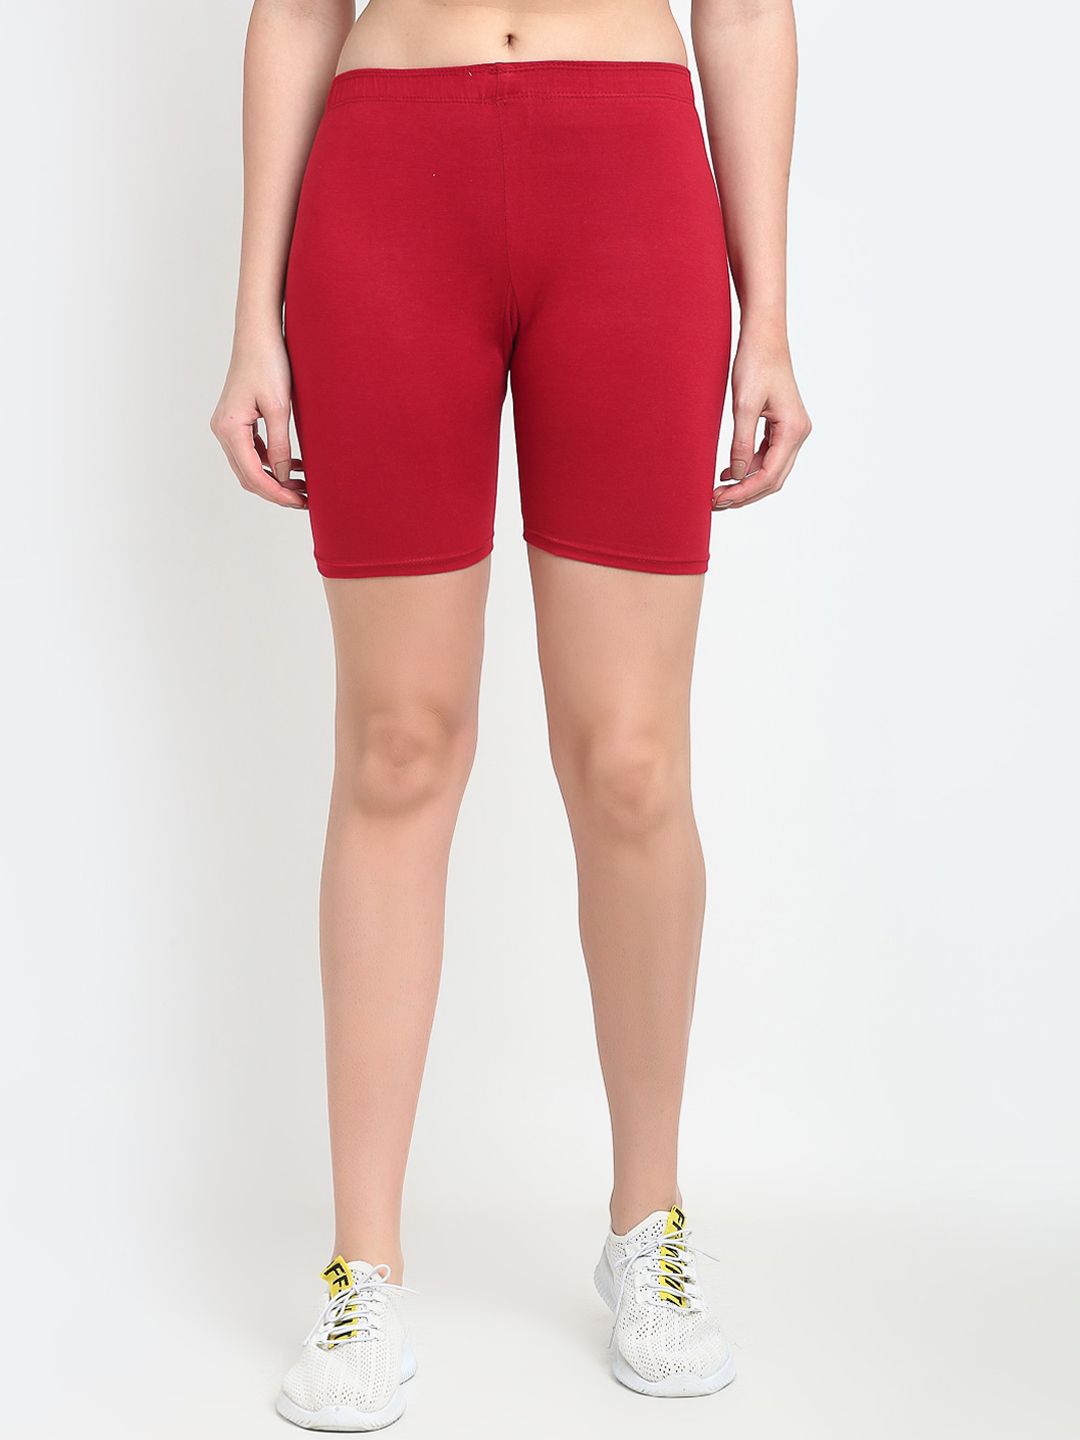 GRACIT Women Maroon Cycling Sports Shorts Price in India